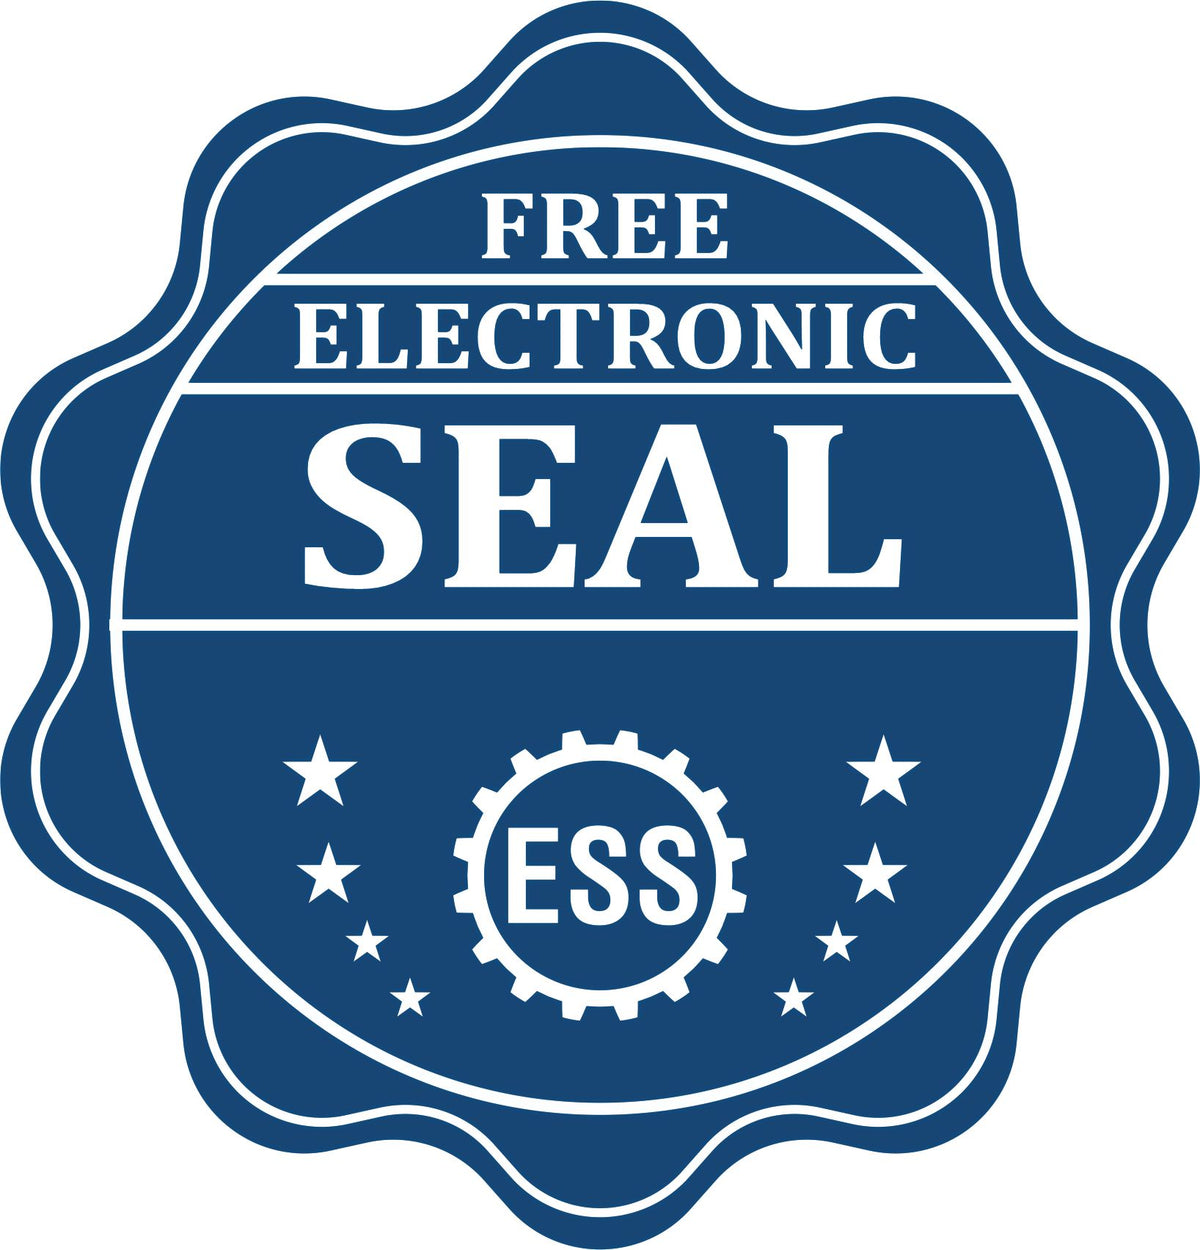 A badge showing a free electronic seal for the Handheld Kansas Professional Geologist Embosser with stars and the ESS gear on the emblem.